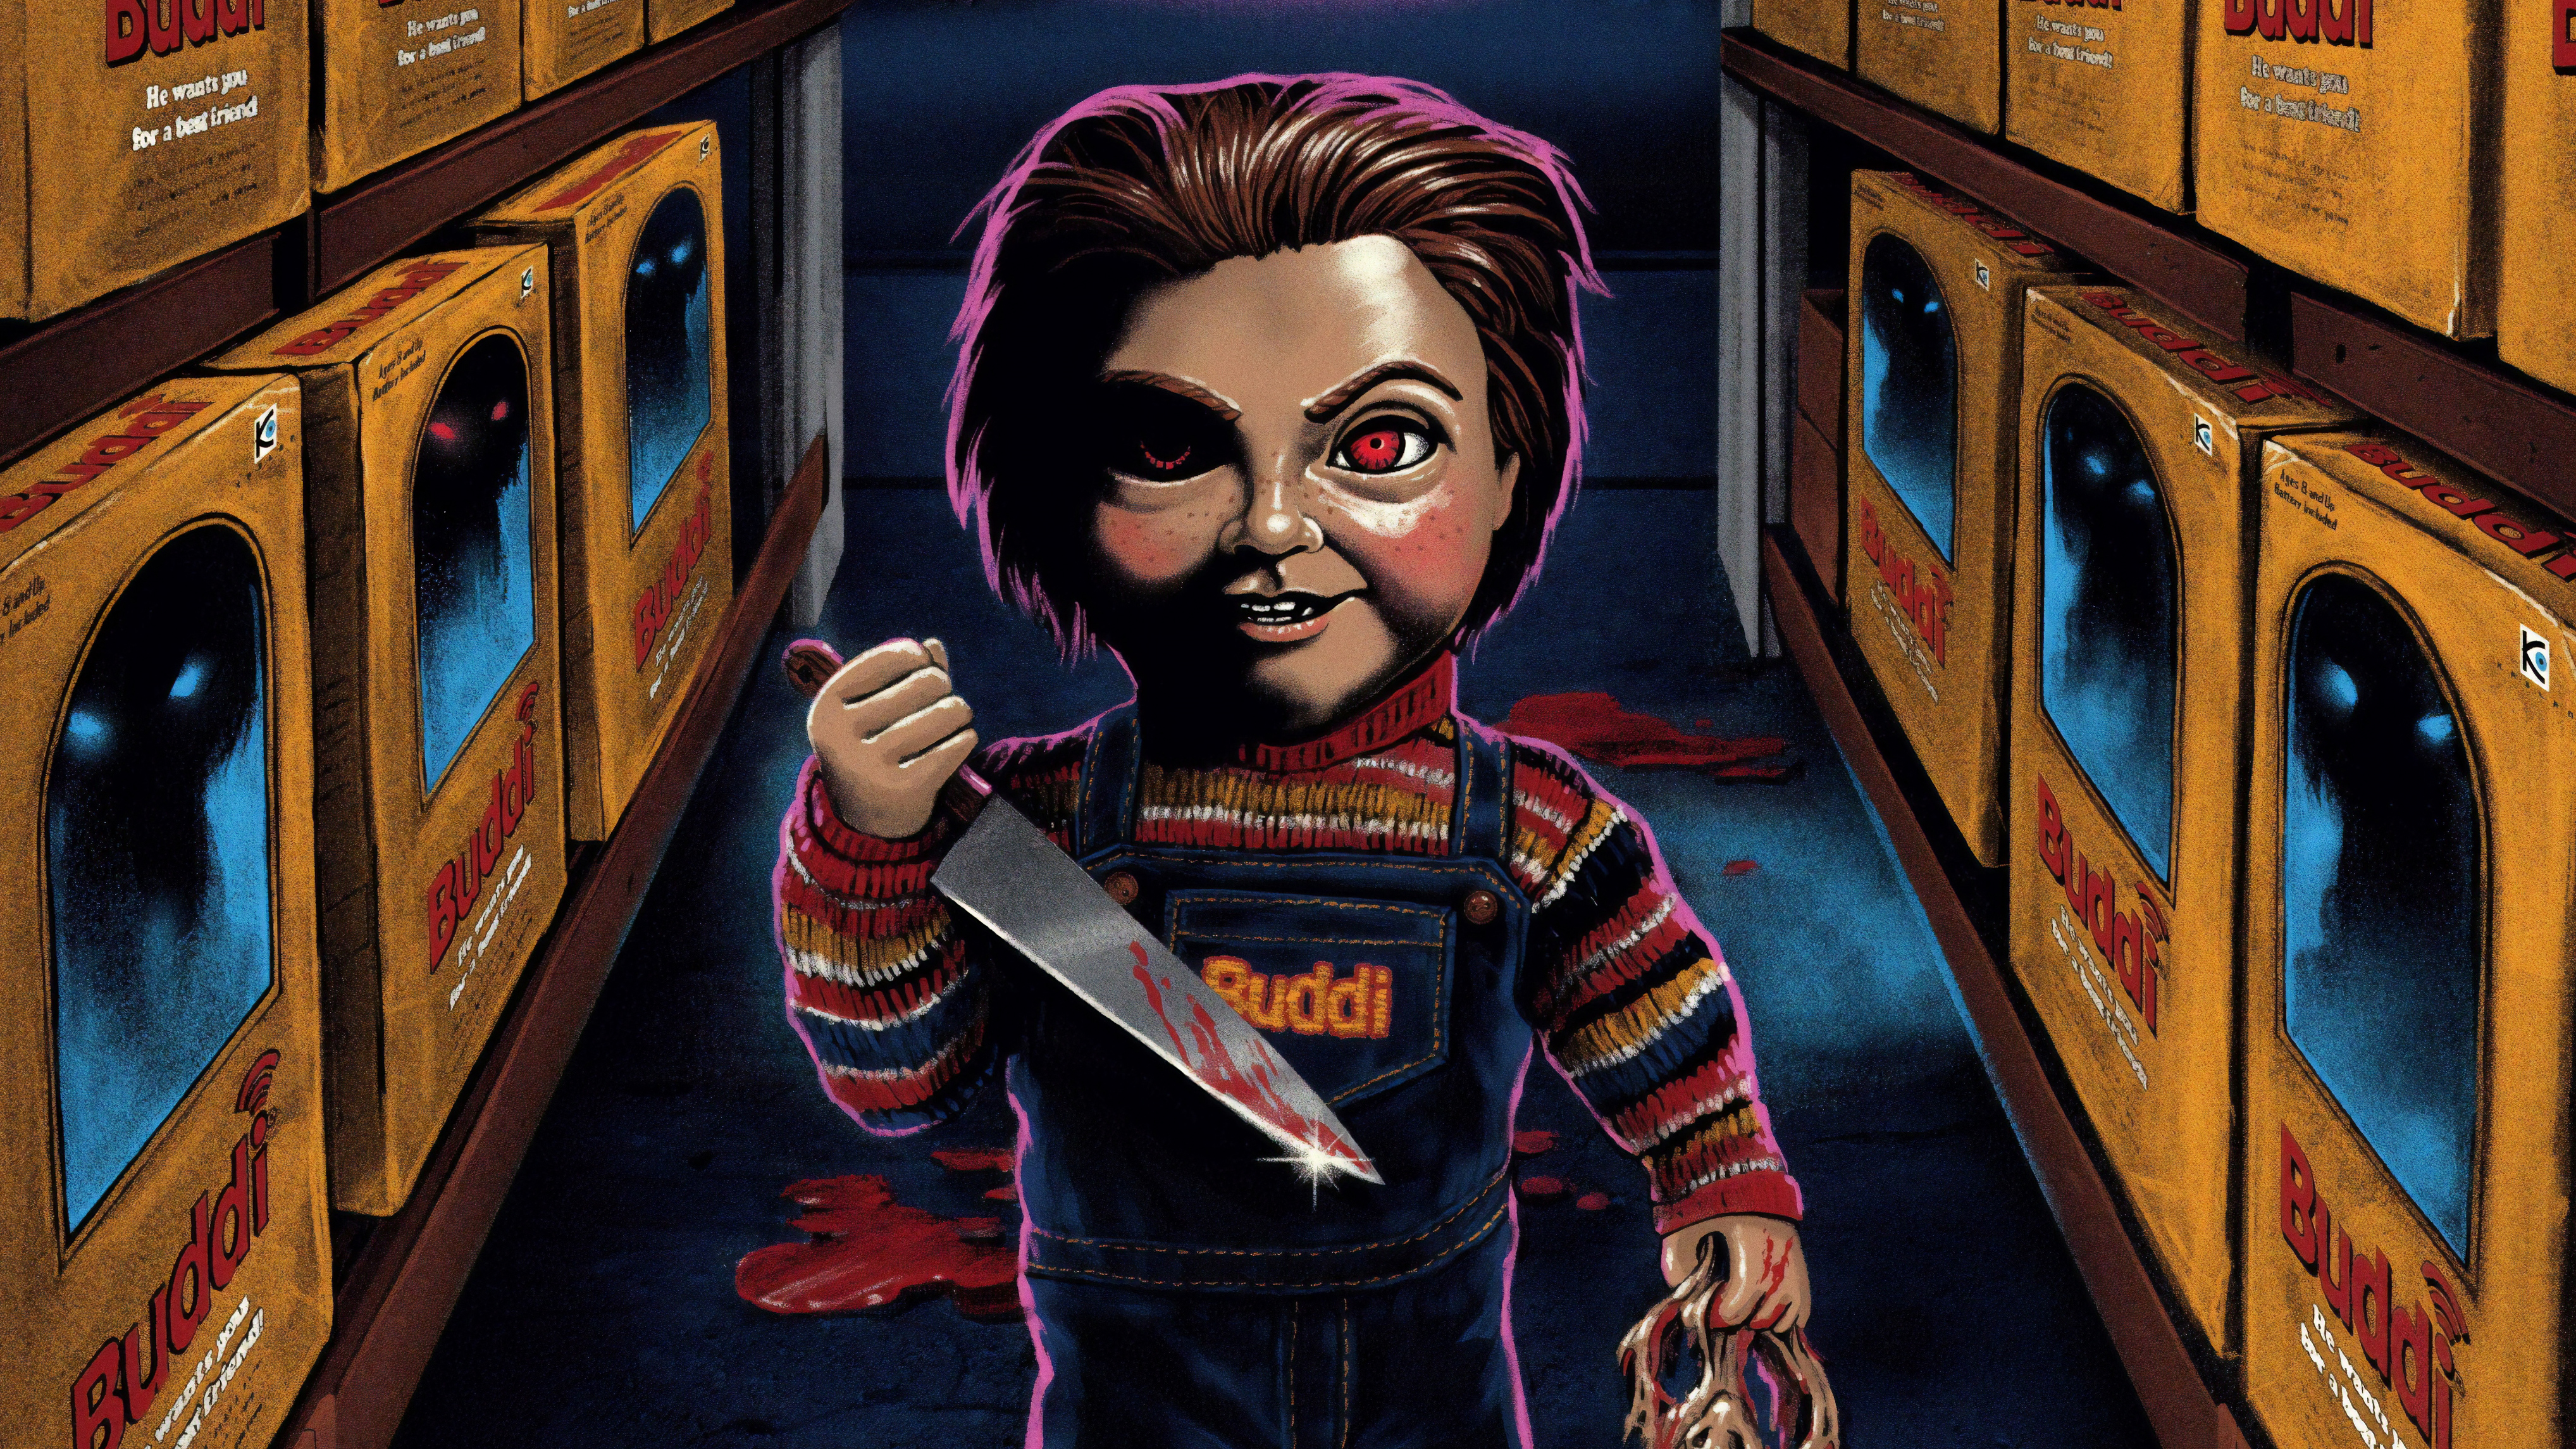 Childs Play 2019 Movie Wallpapers